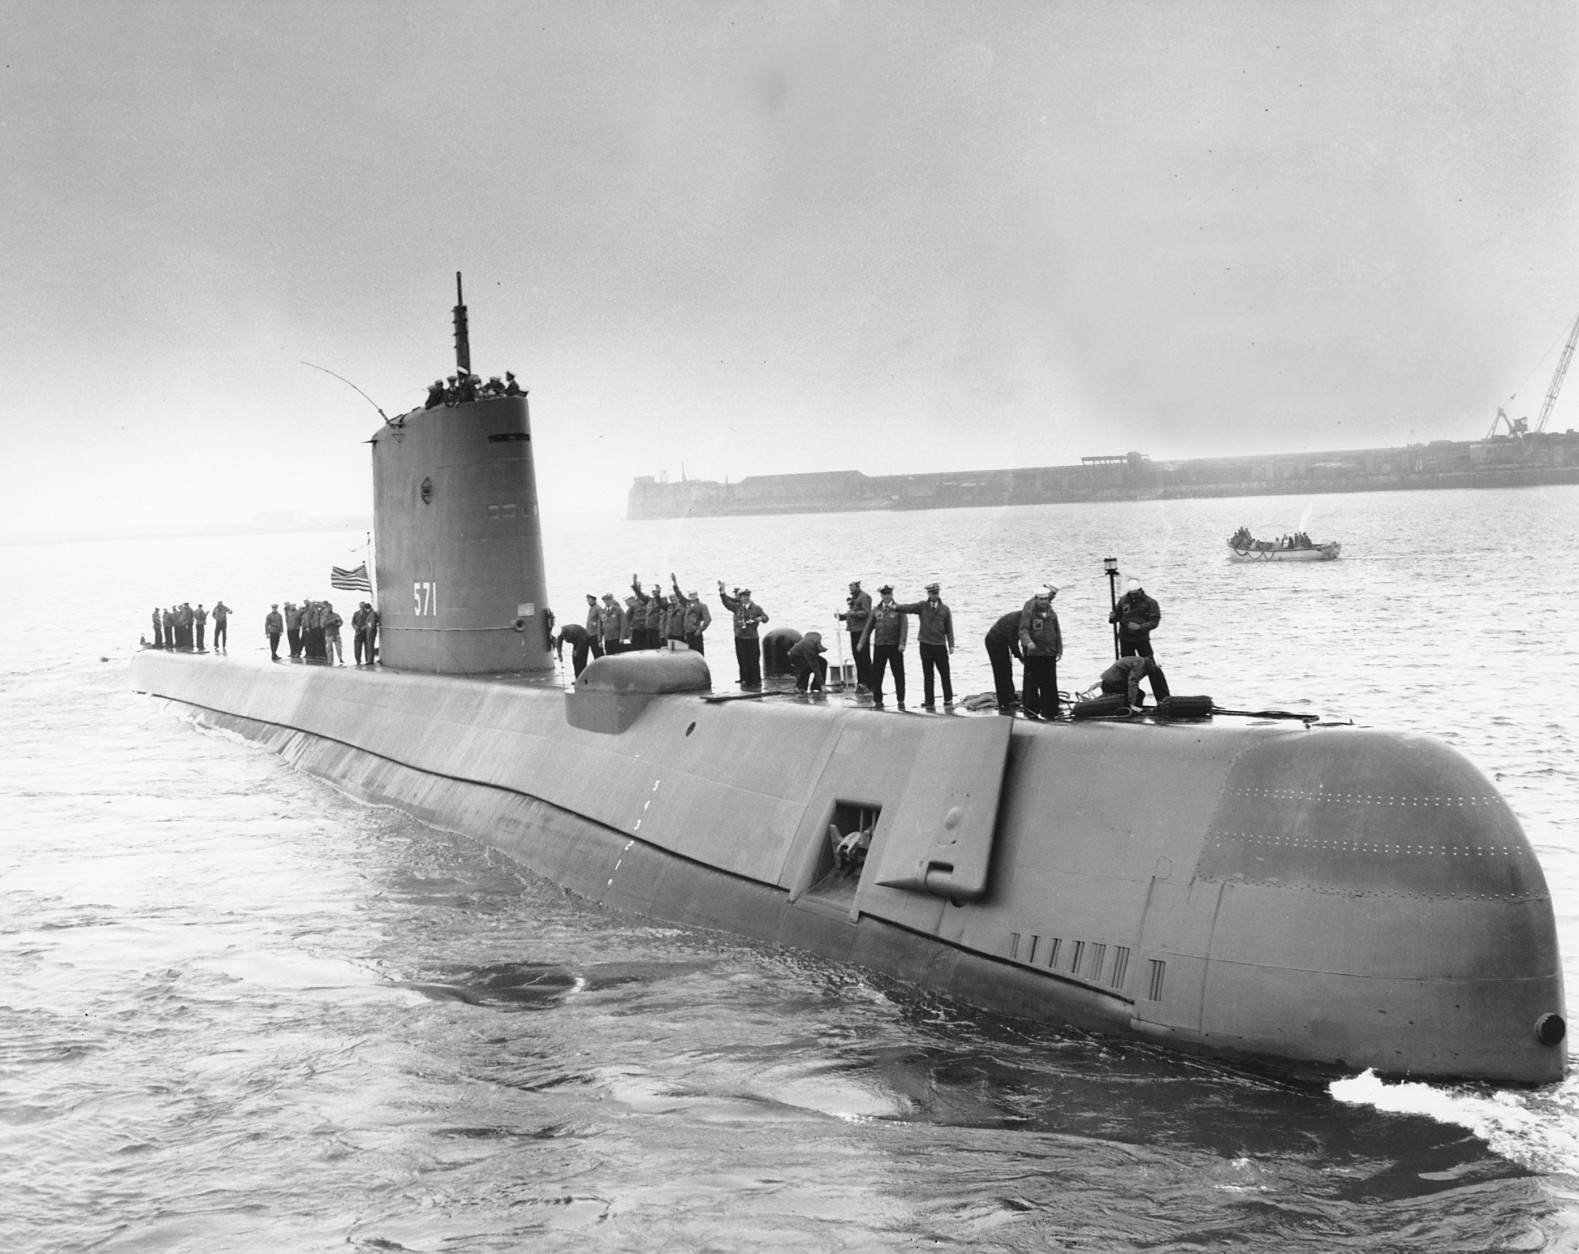 The U.S. Navy's nuclear-powered submarine USS Nautilus leaves for home at Portland, Dorset on Aug. 18, 1958.  (AP Photo)